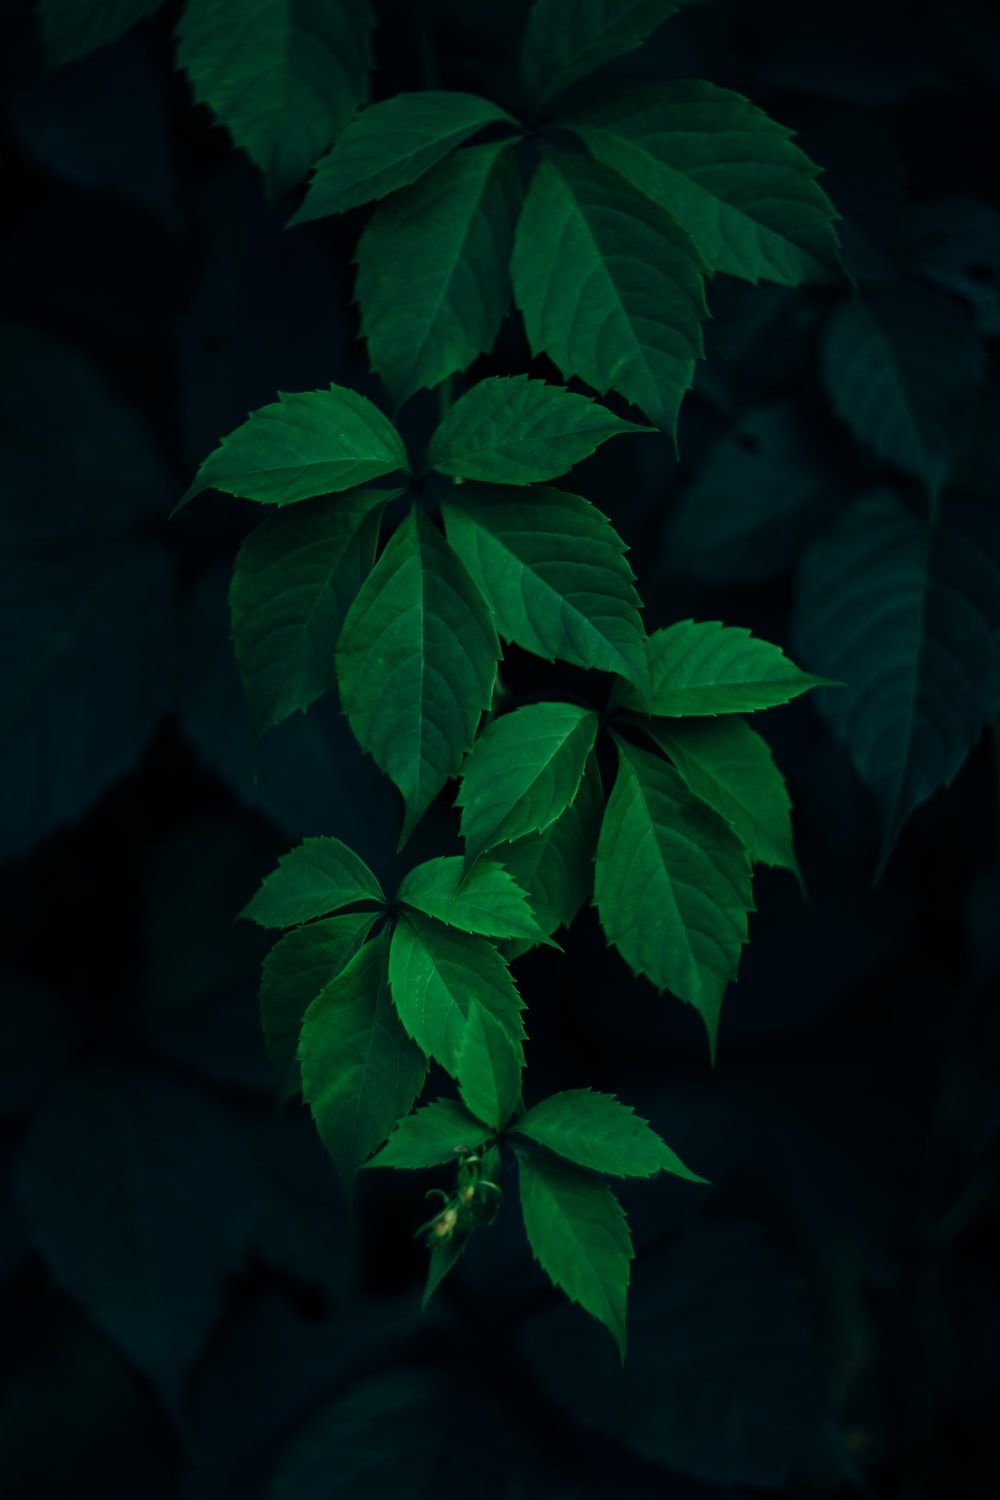 Dark Leaves Picture. Download Free Image